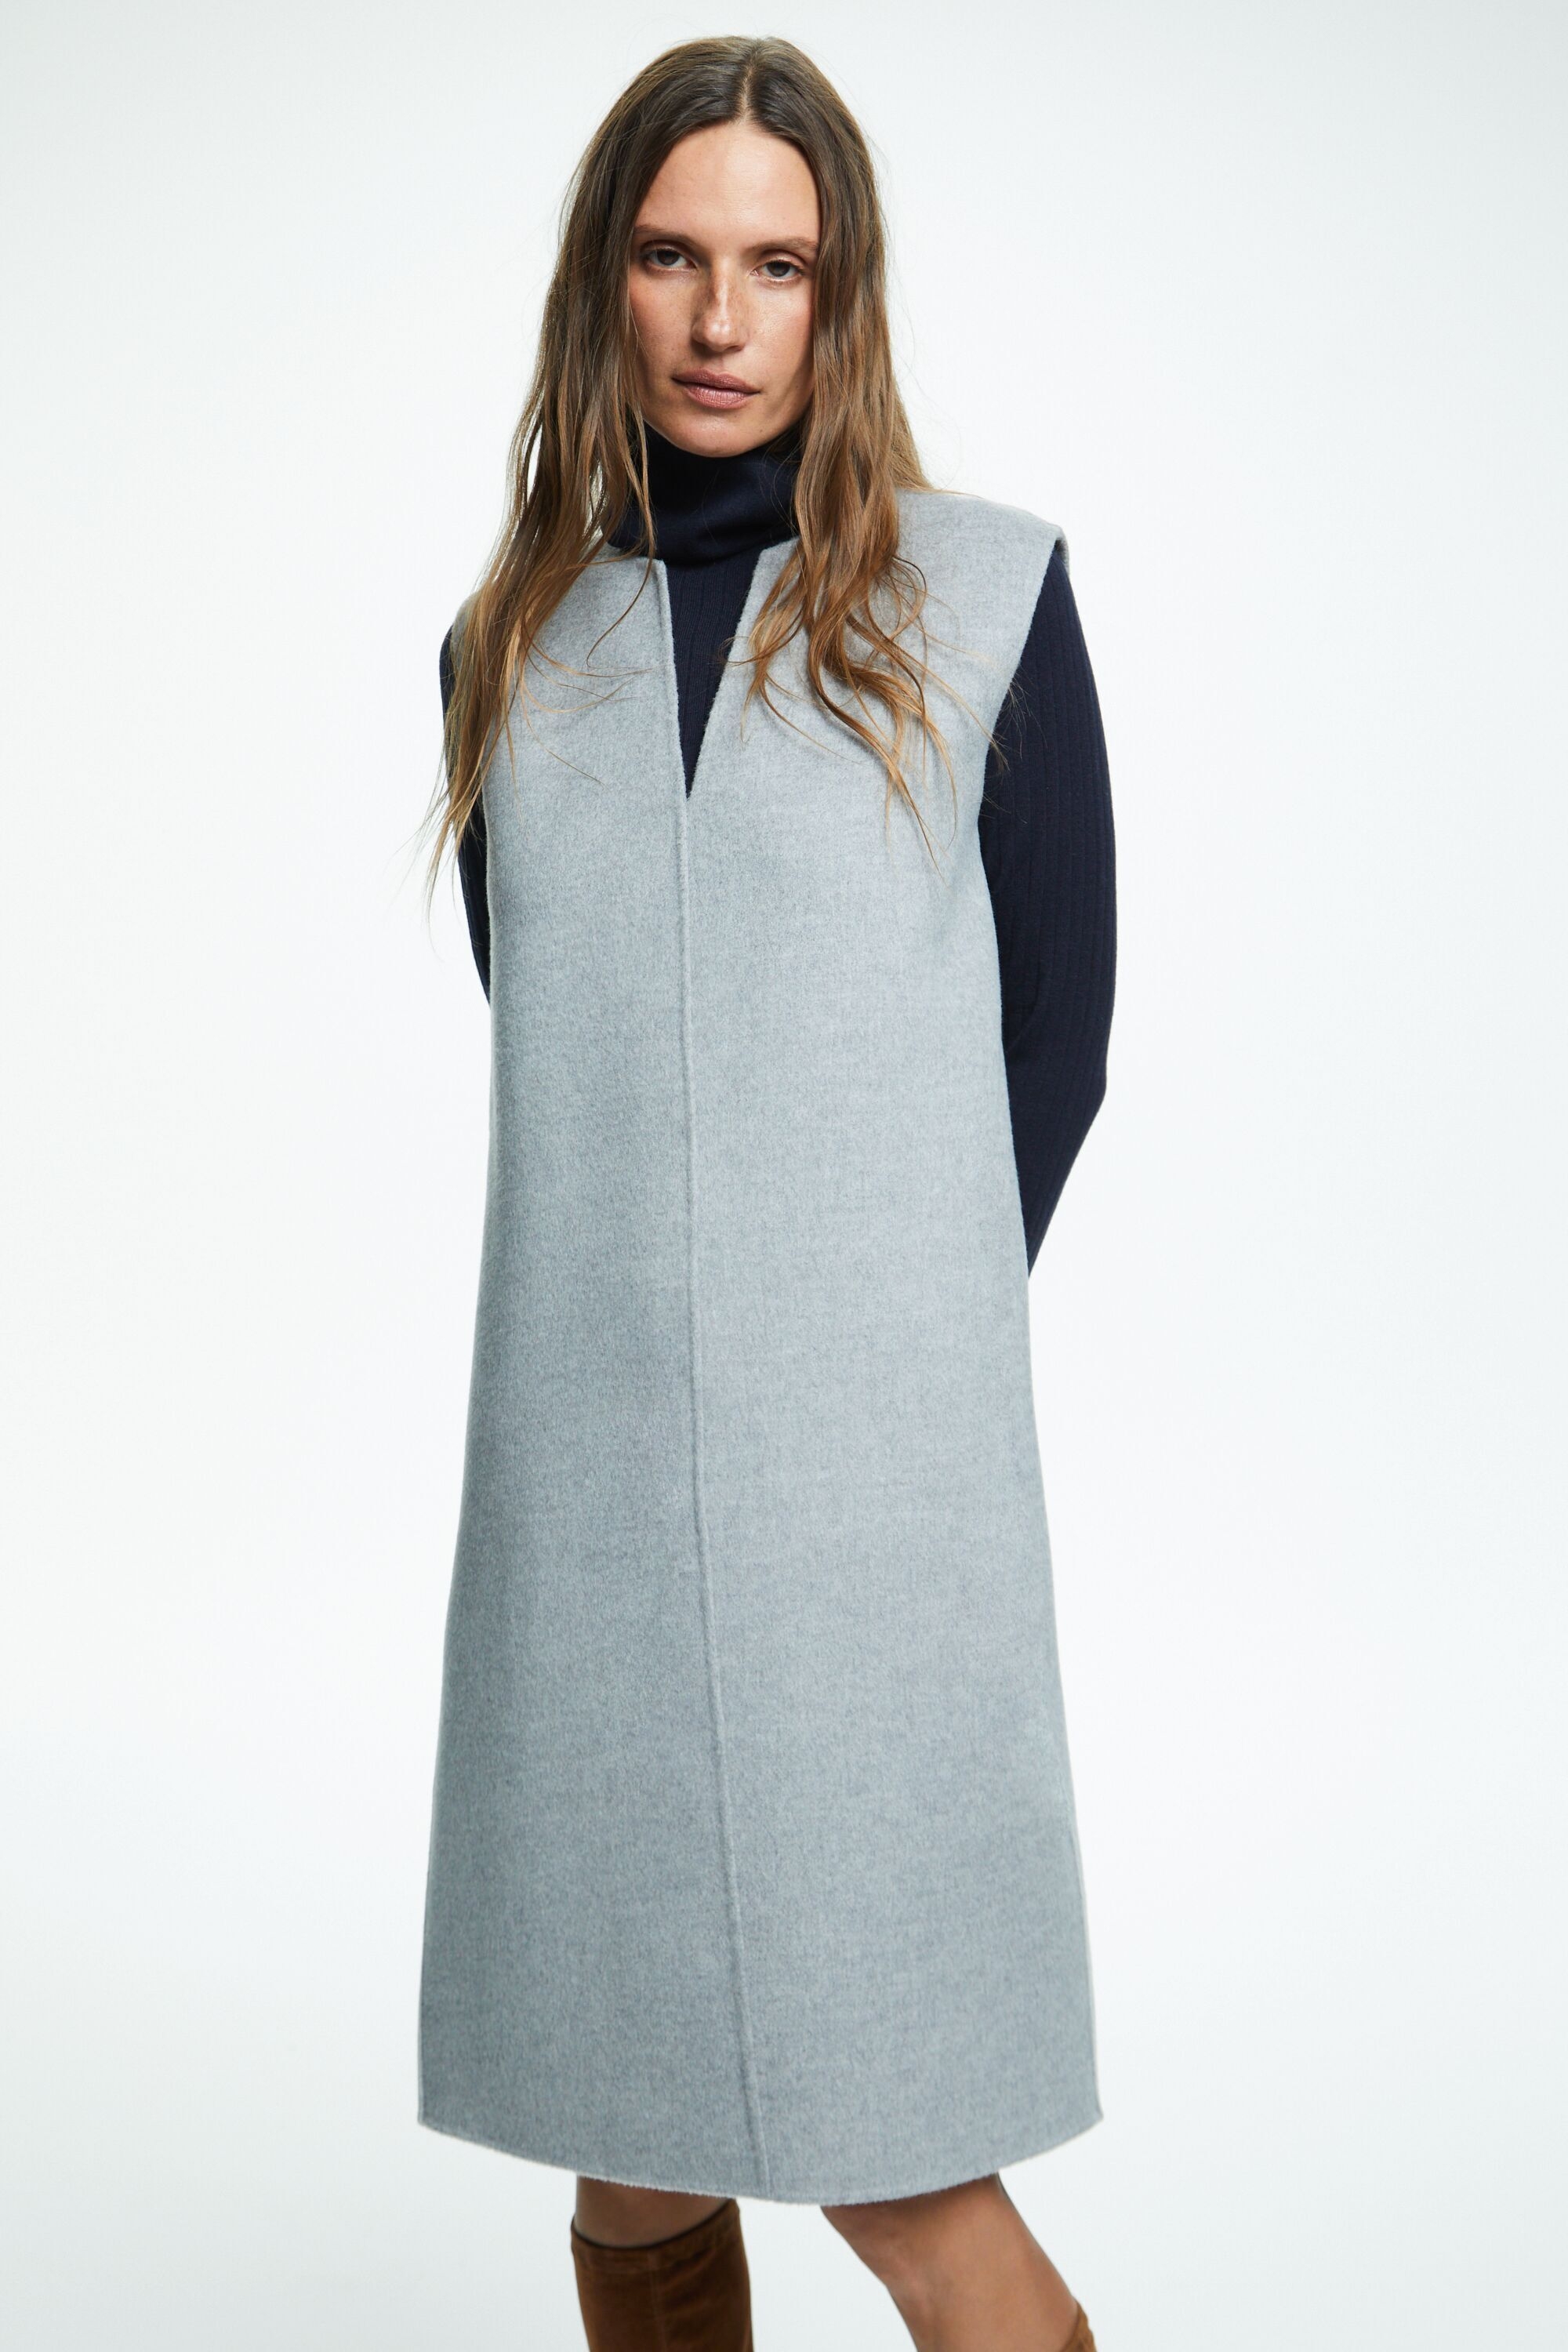 Double-faced wool cocoon dress